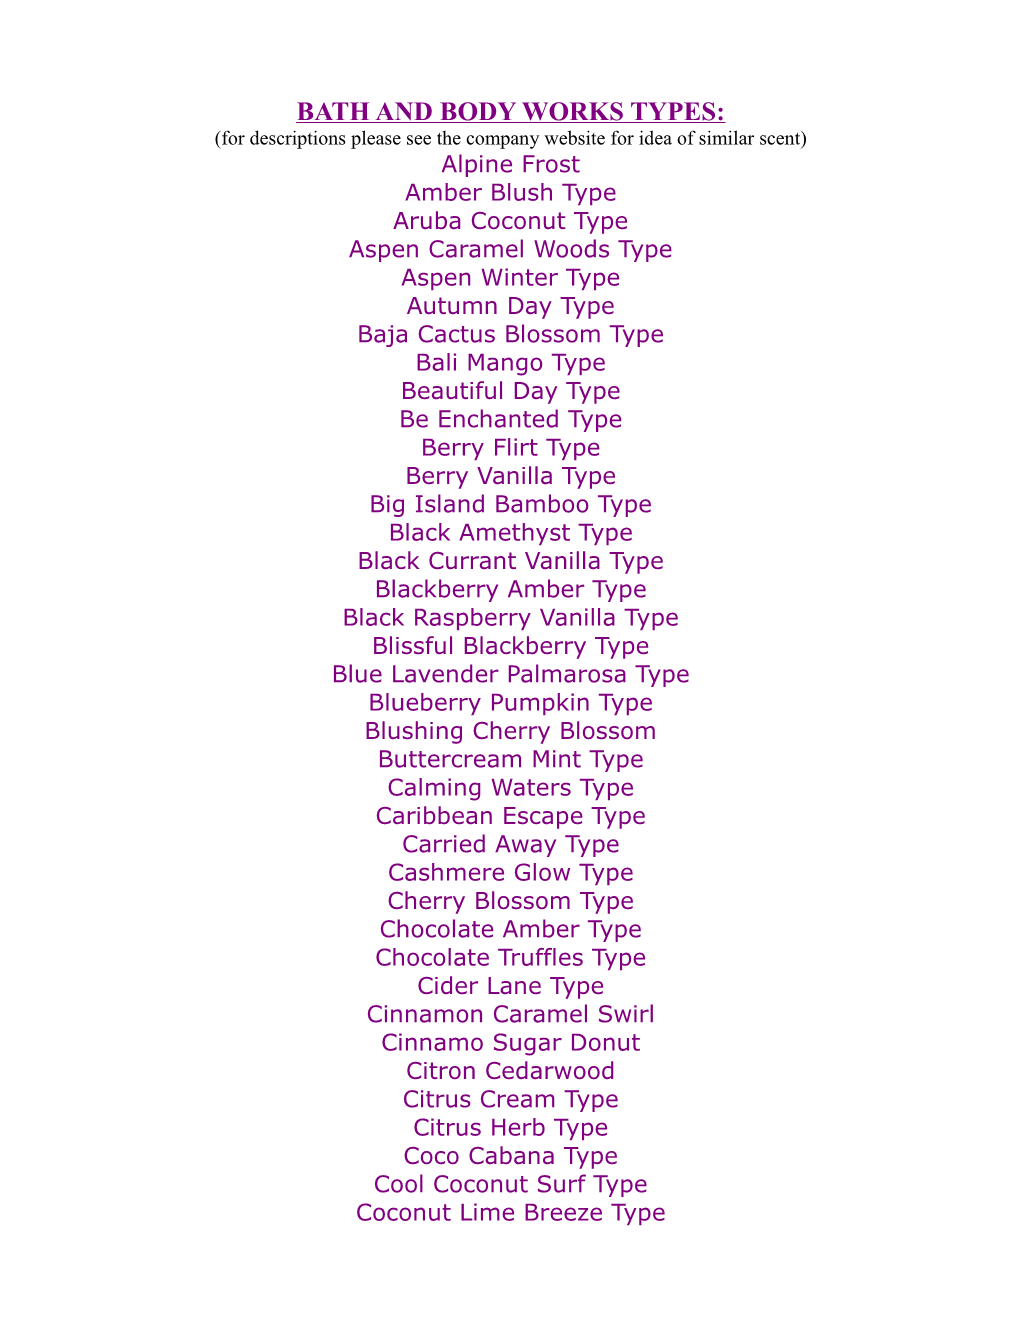 BATH and BODY WORKS TYPES: (For Descriptions Please See the Company Website for Idea Of